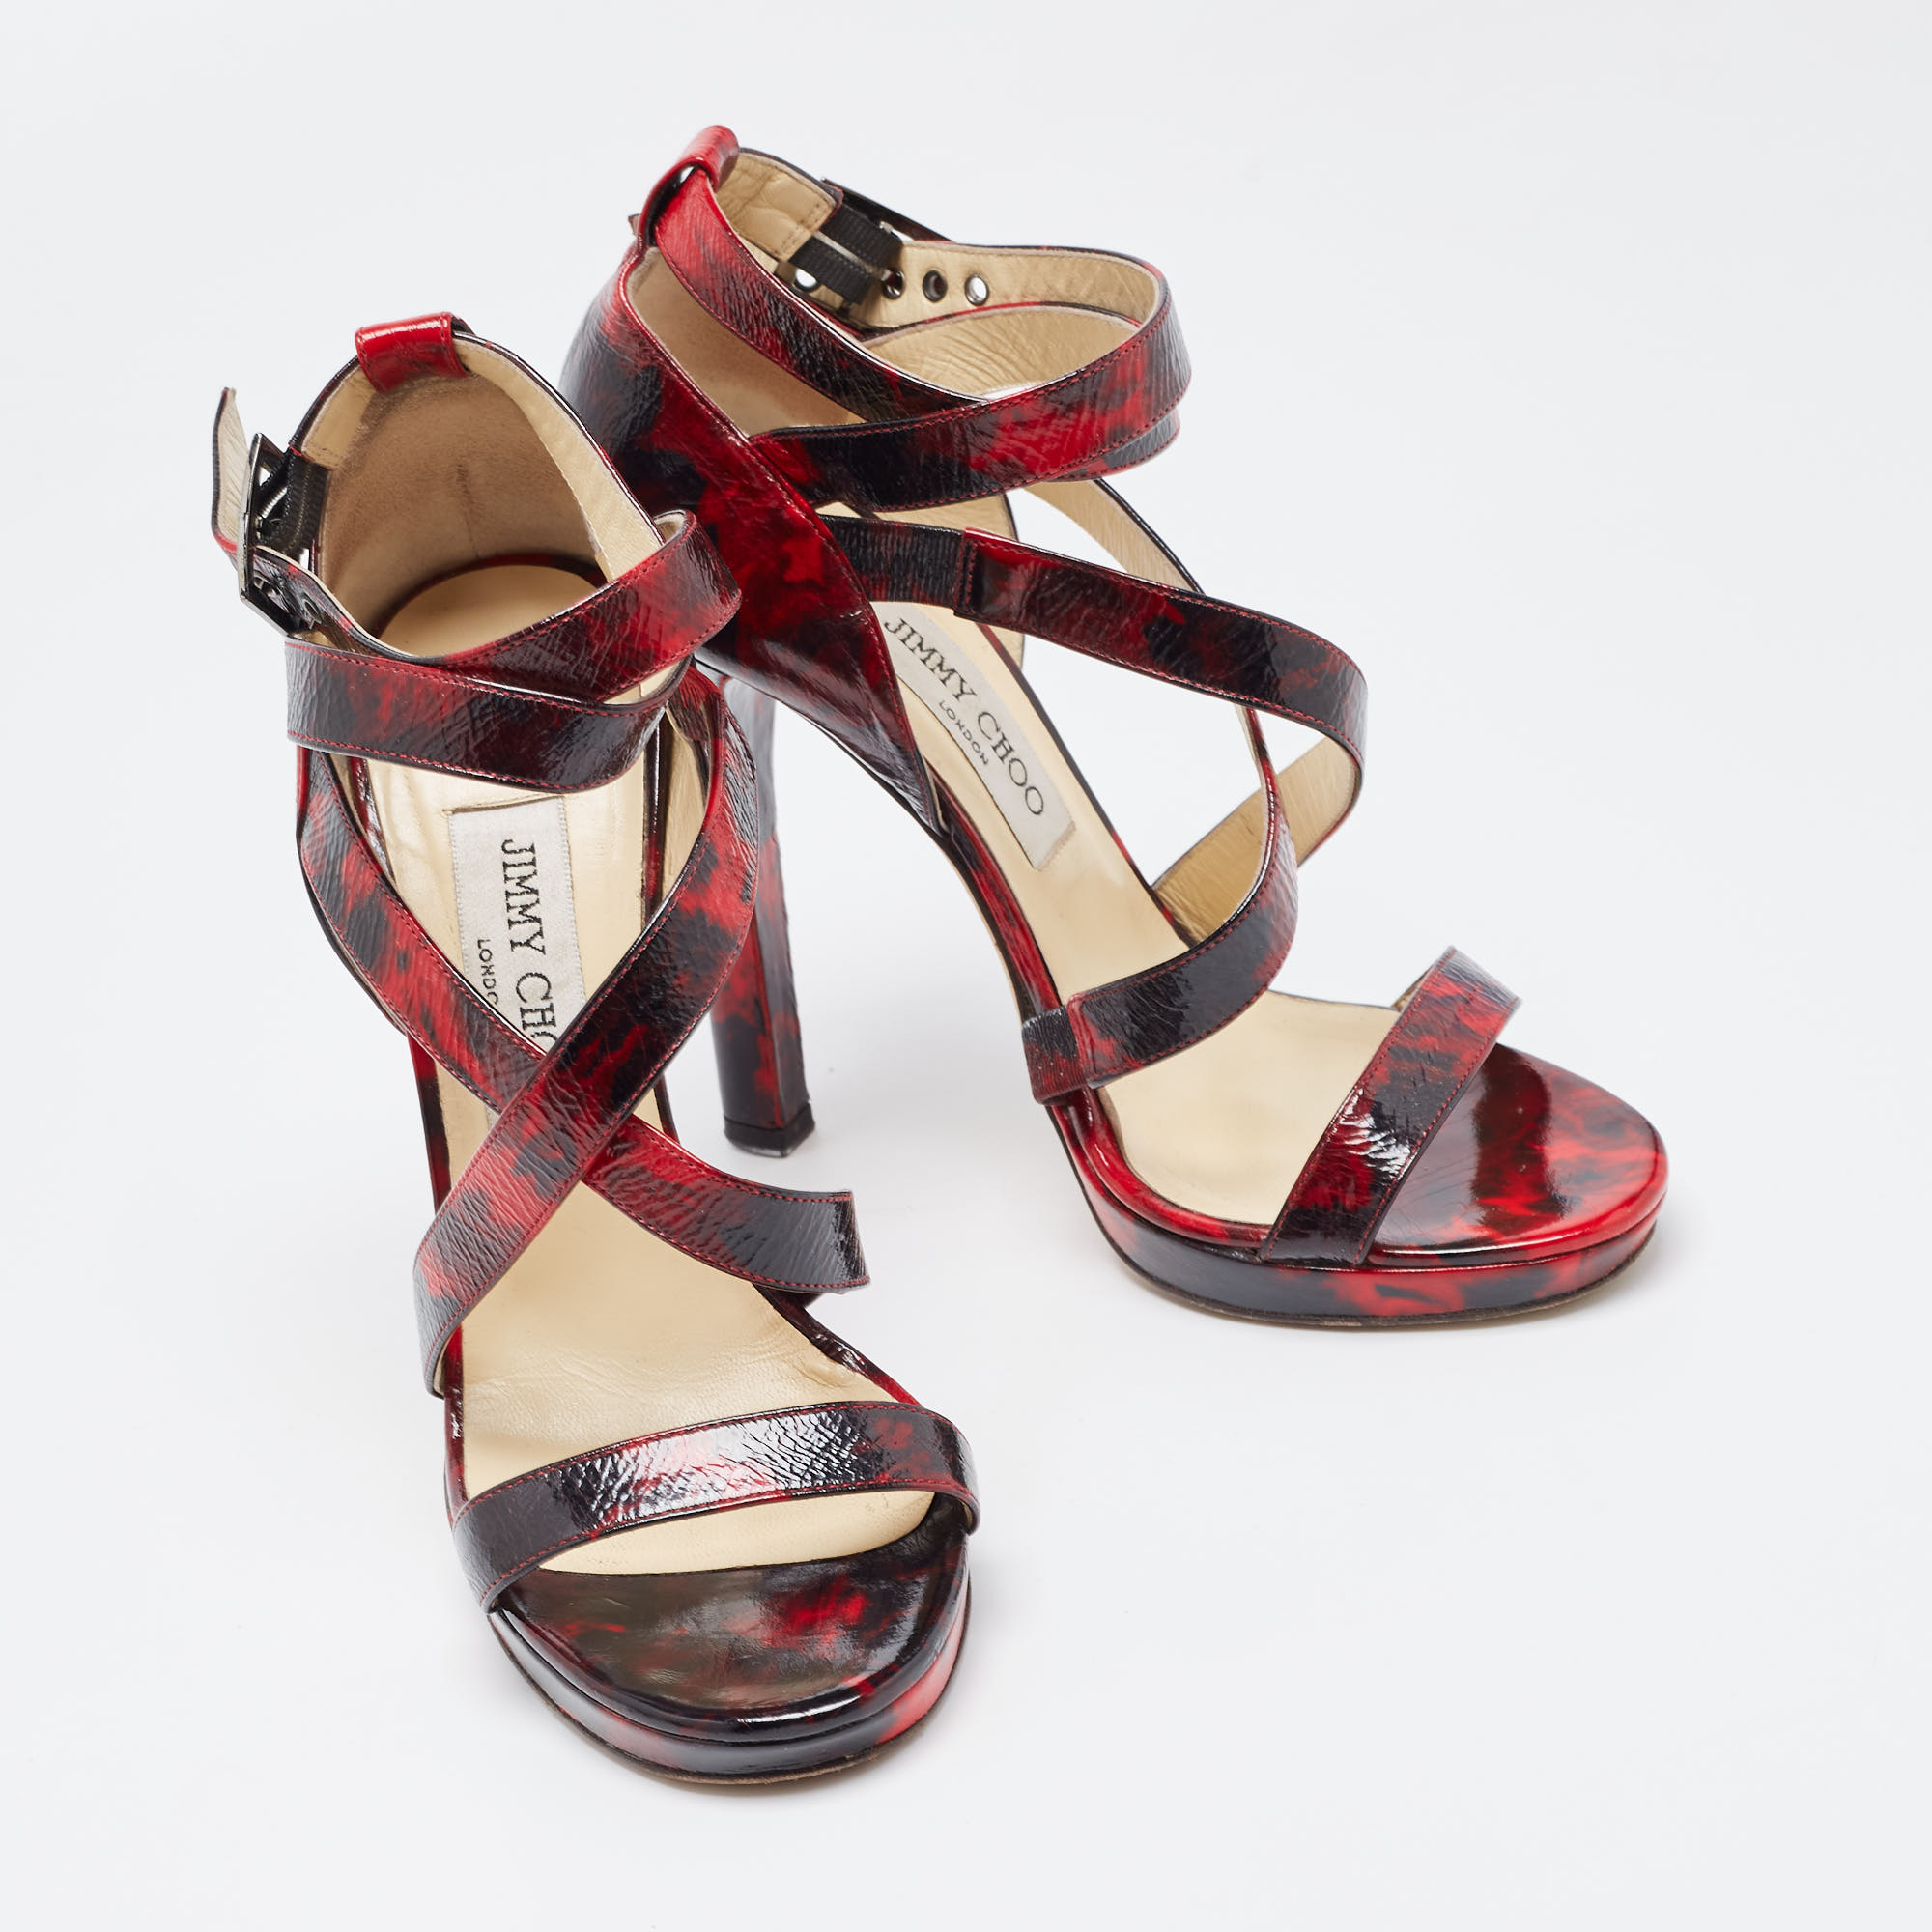 Jimmy Choo Red/Black Leather Criss Cross Ankle Strap Sandals Size 37.5